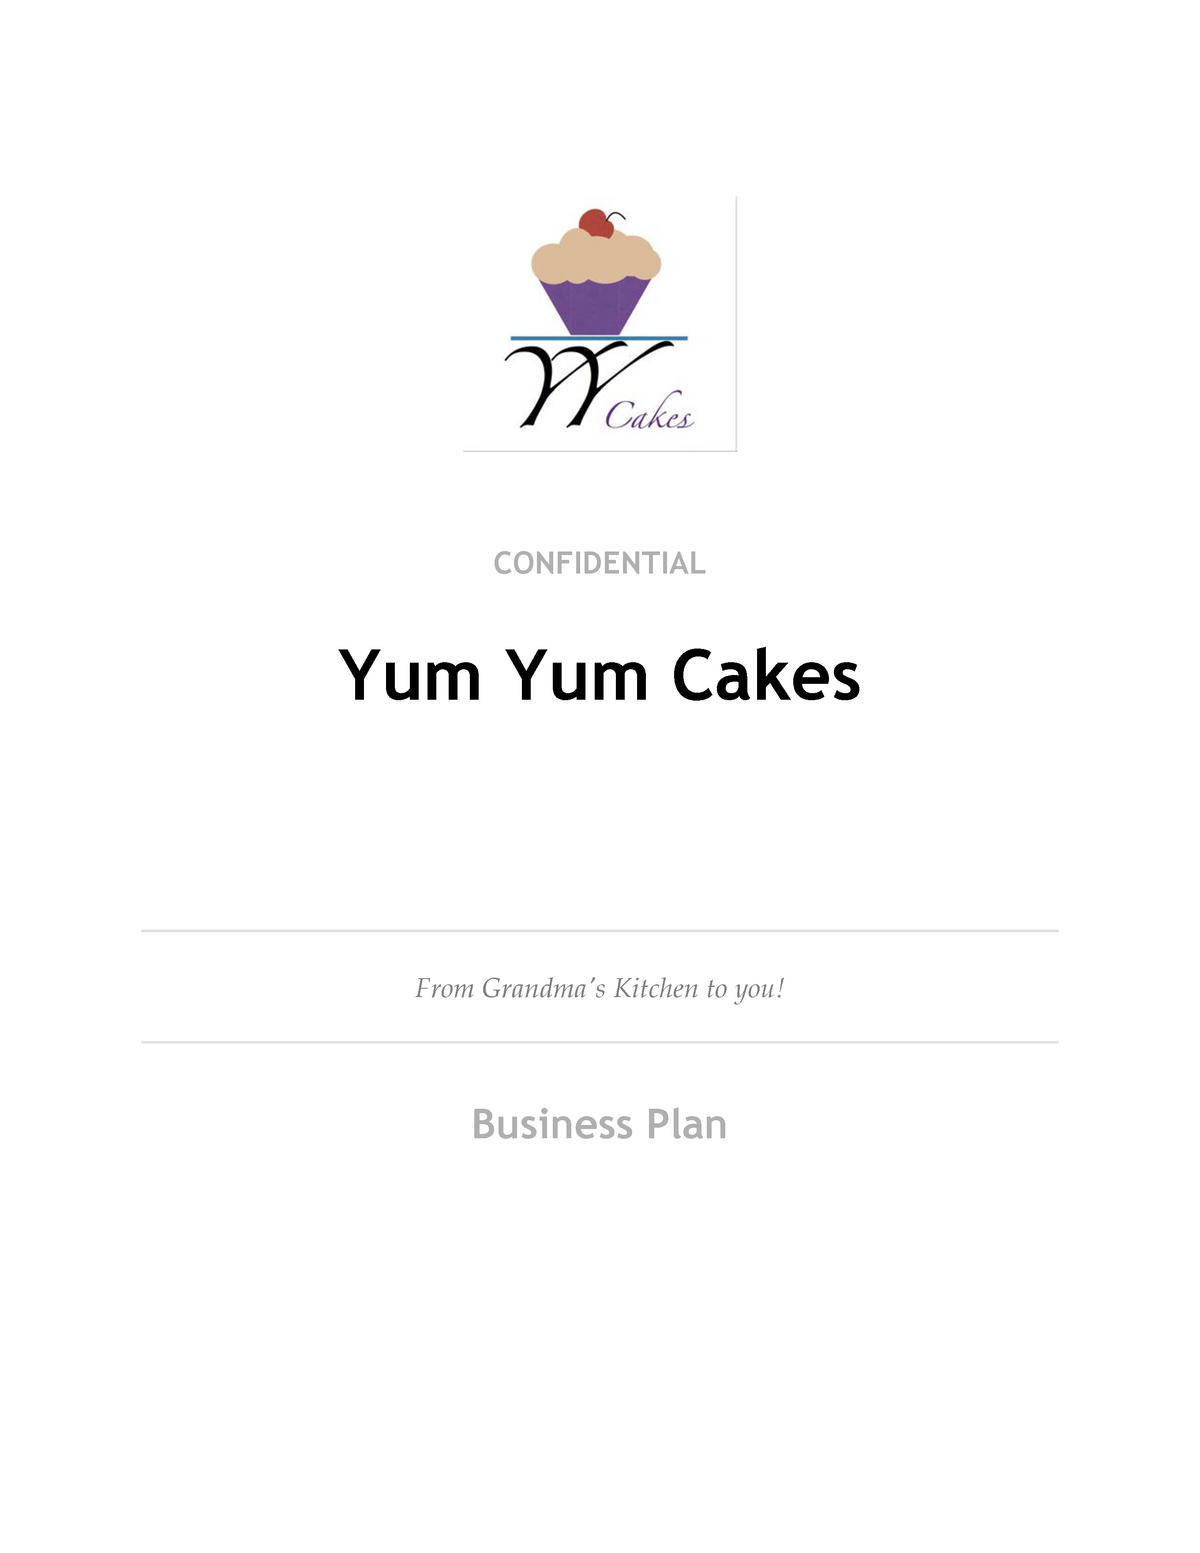 Marketing Plans for Bakery Business - 20+ Examples, Format, Pdf | Examples